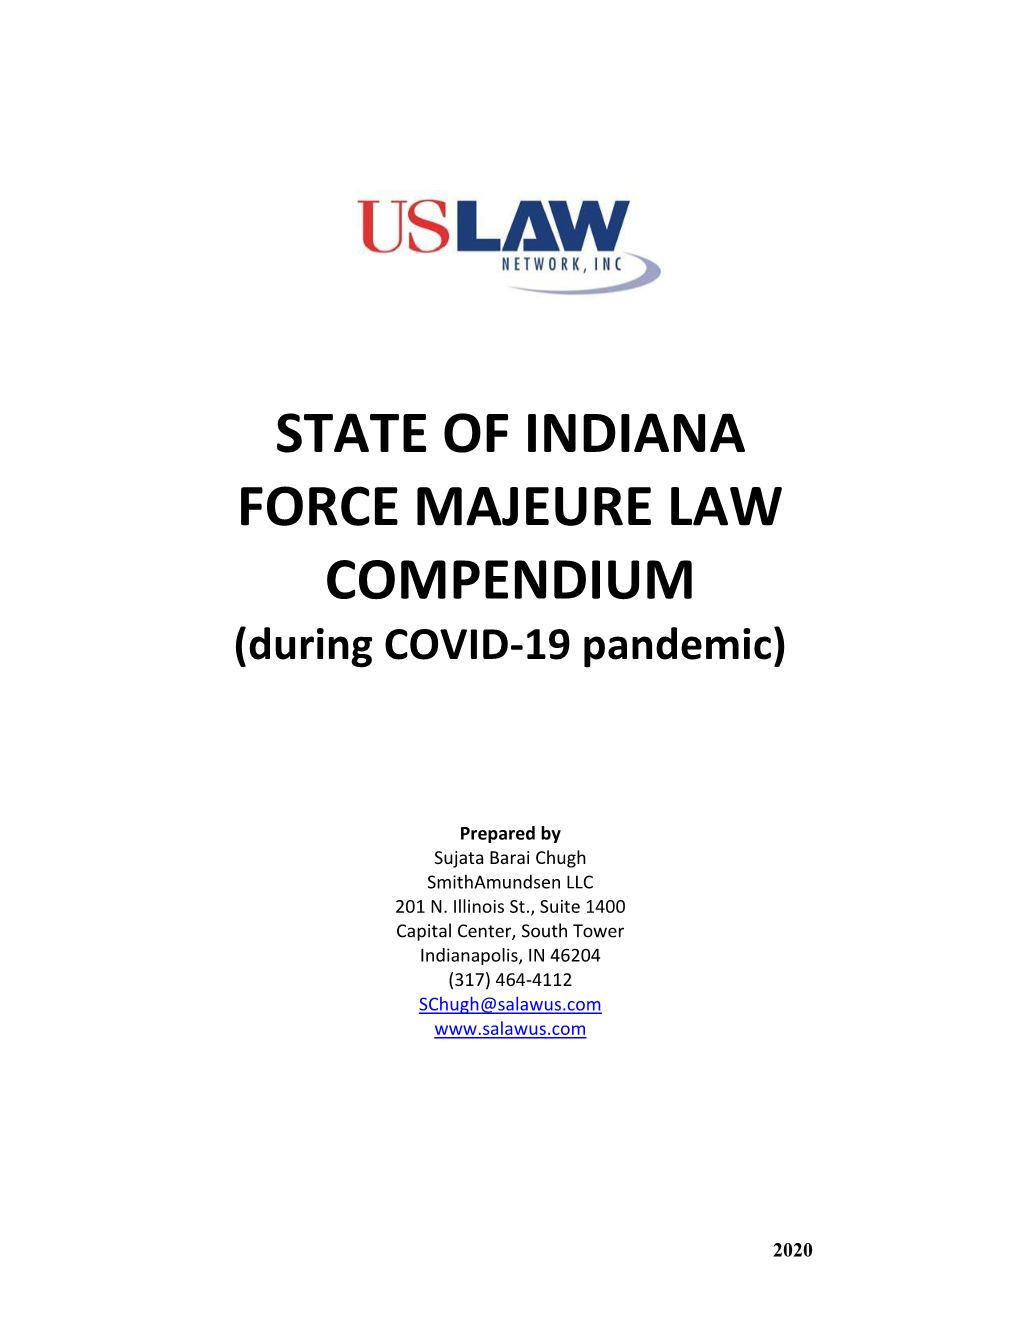 STATE of INDIANA FORCE MAJEURE LAW COMPENDIUM (During COVID-19 Pandemic)